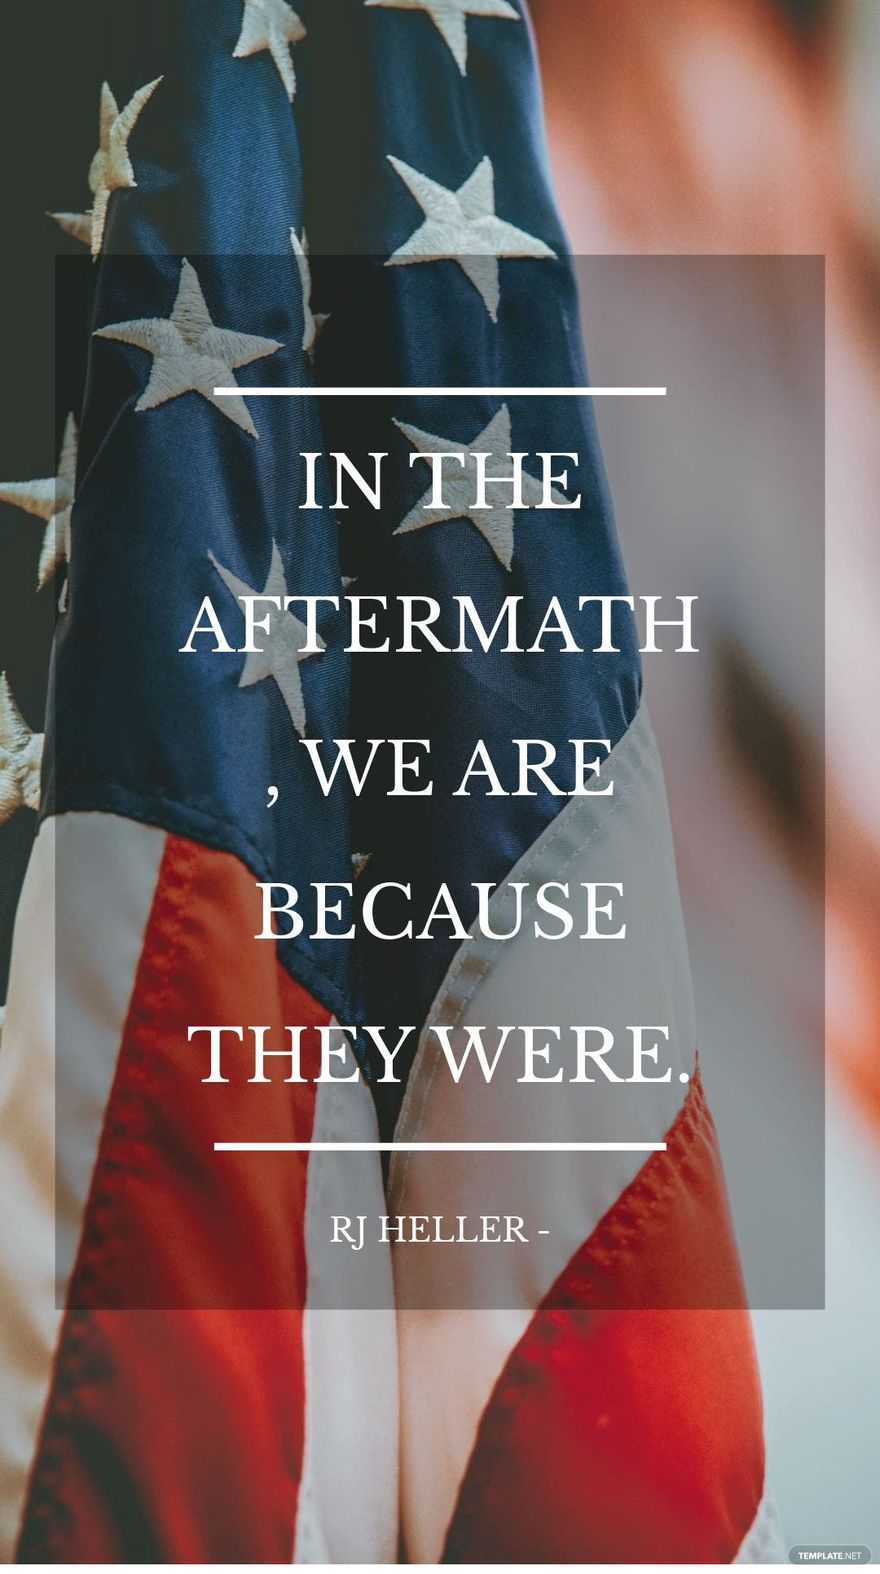 RJ Heller - In the aftermath, we are because they were.